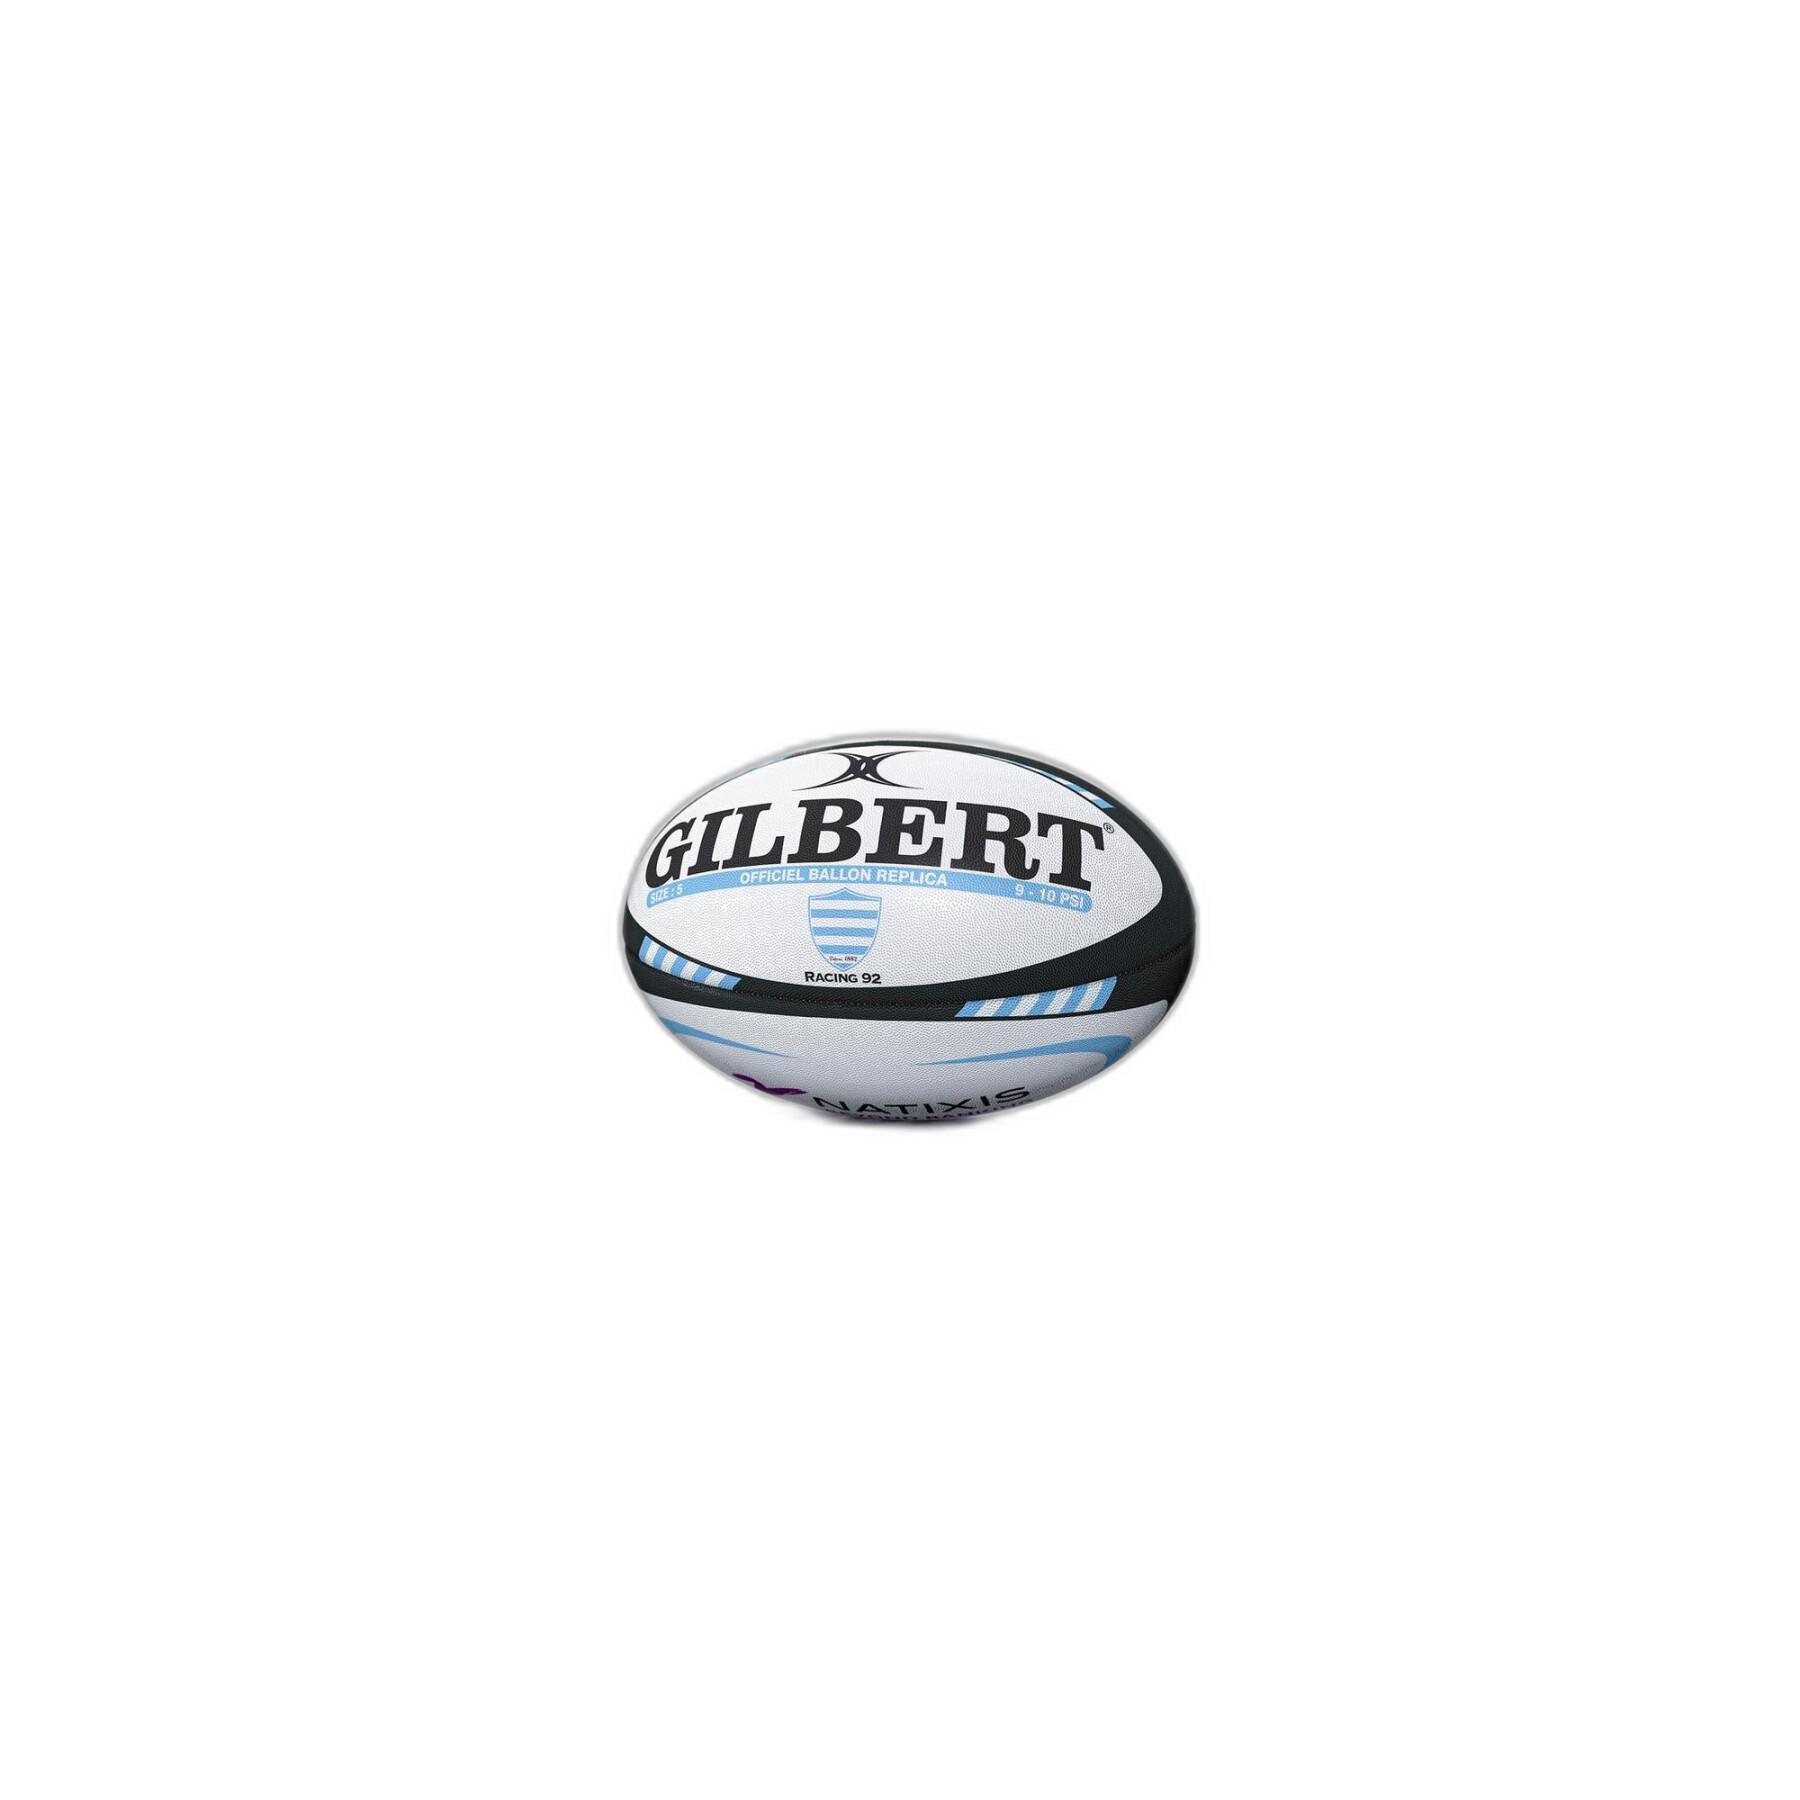 Rugby ball Racing 92